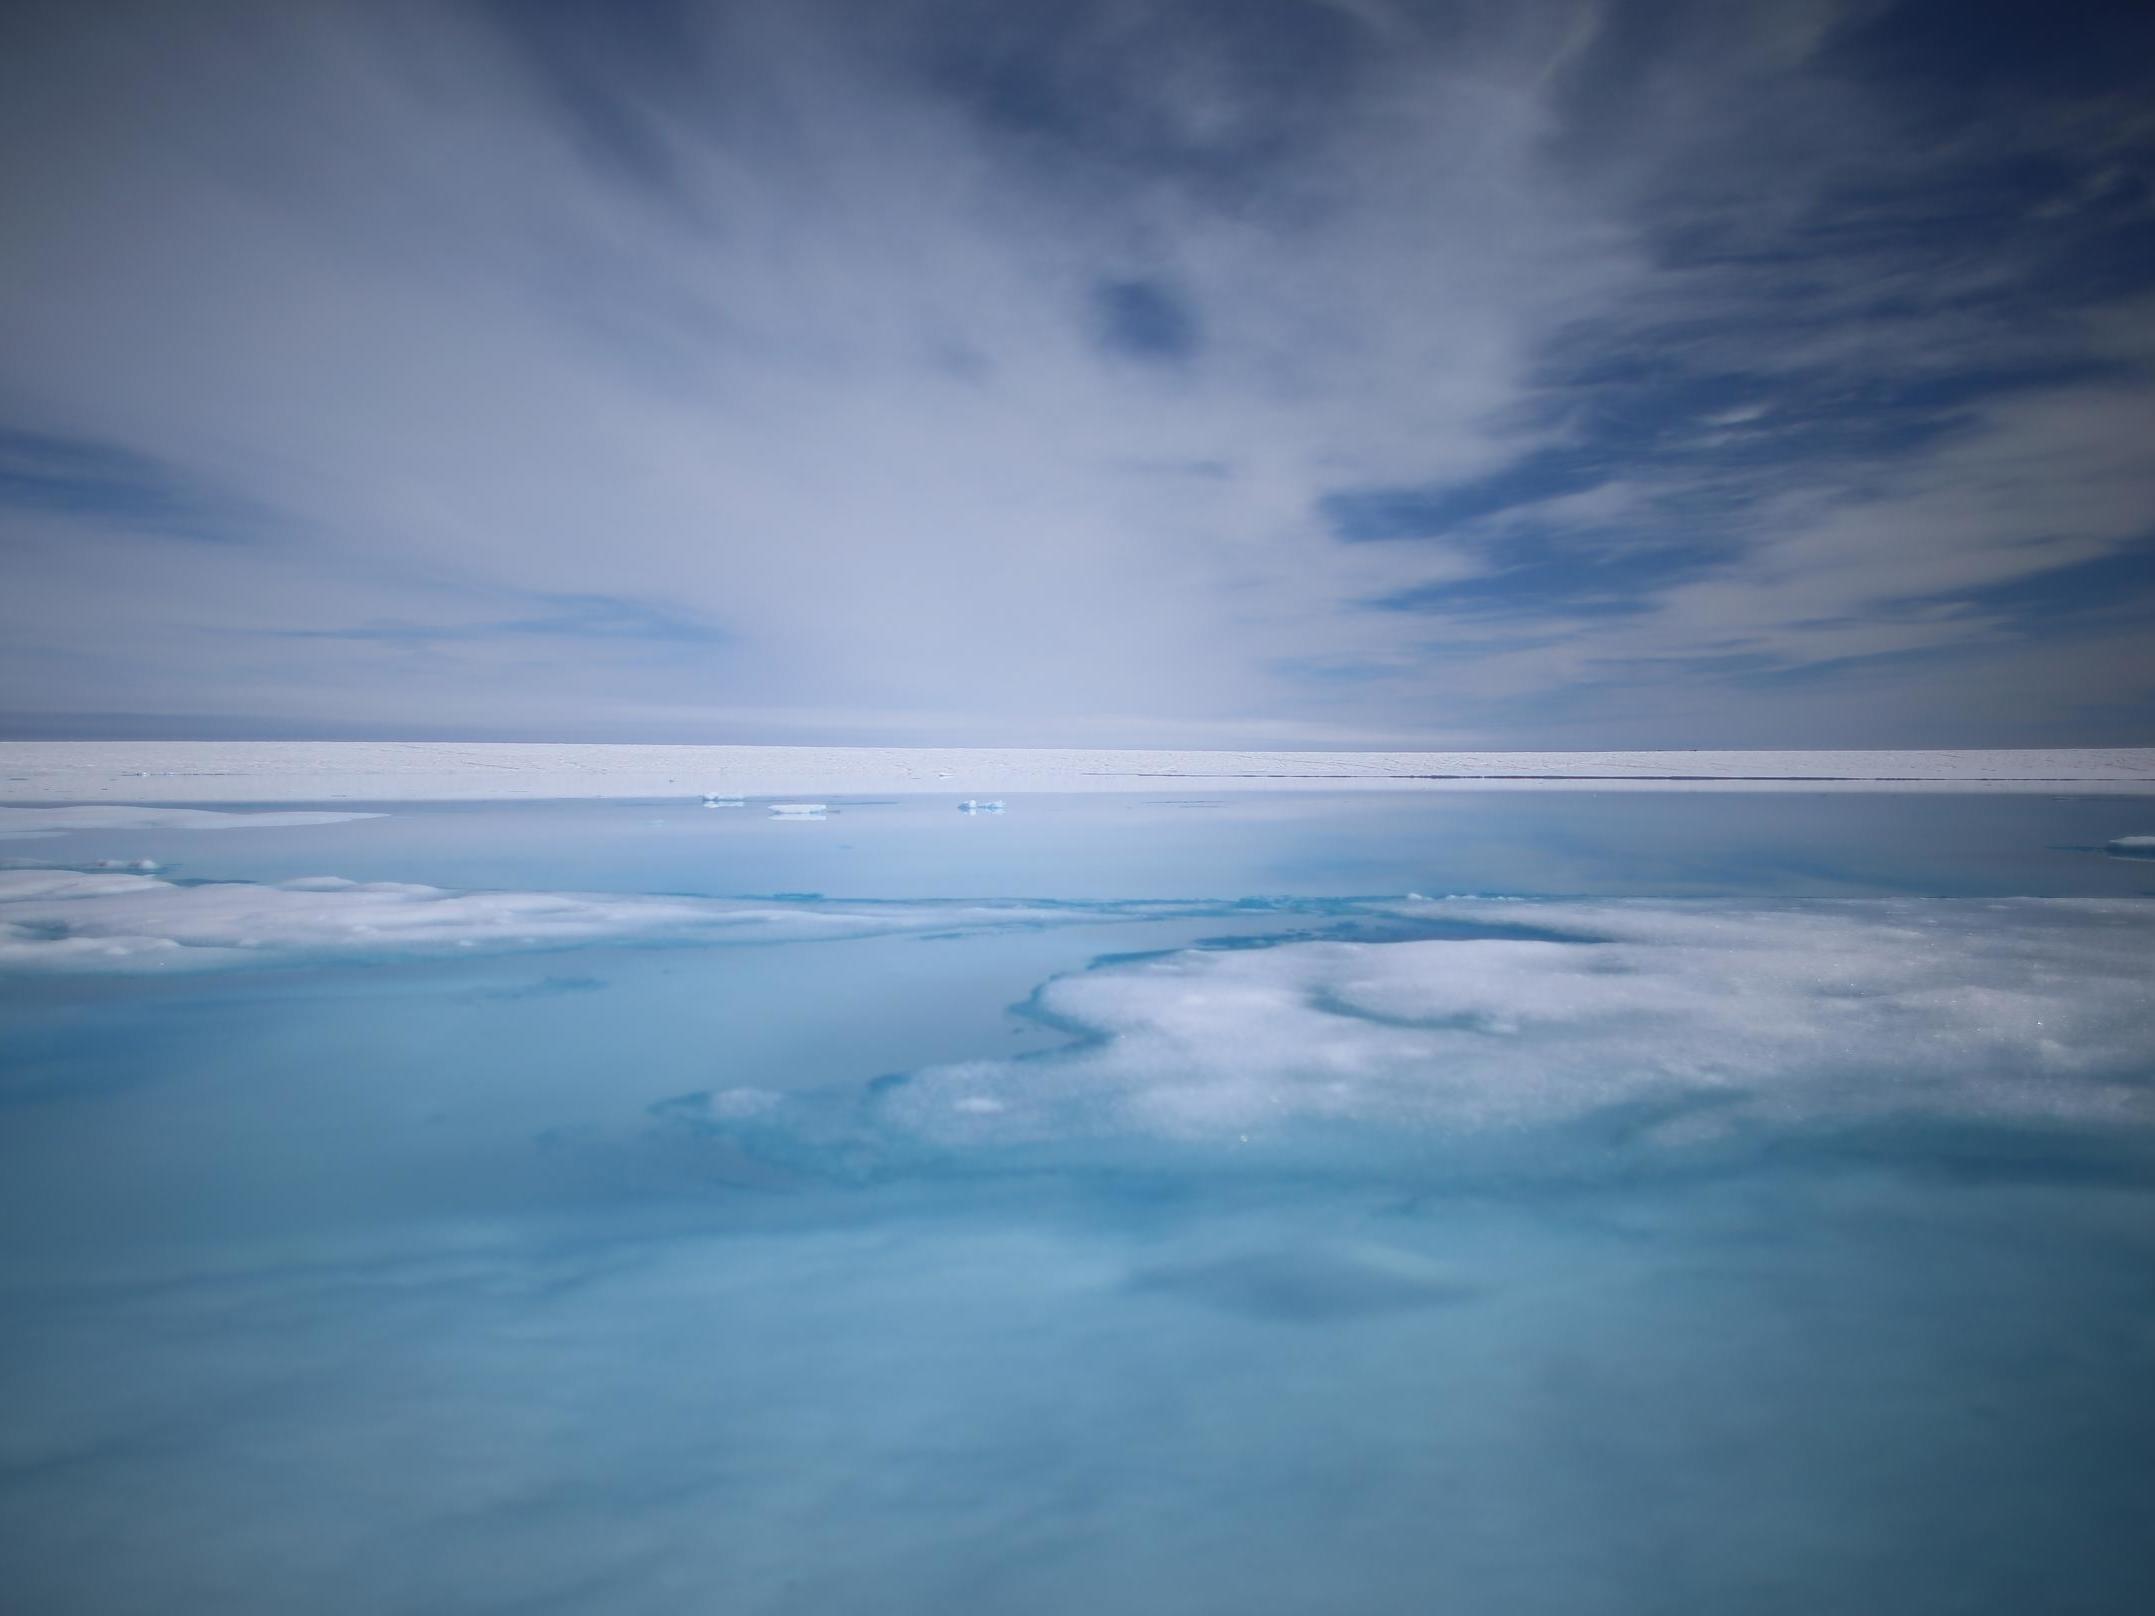 'Melting faster and faster': Greenland lost 1 million tonnes of ice for each minute of 2019